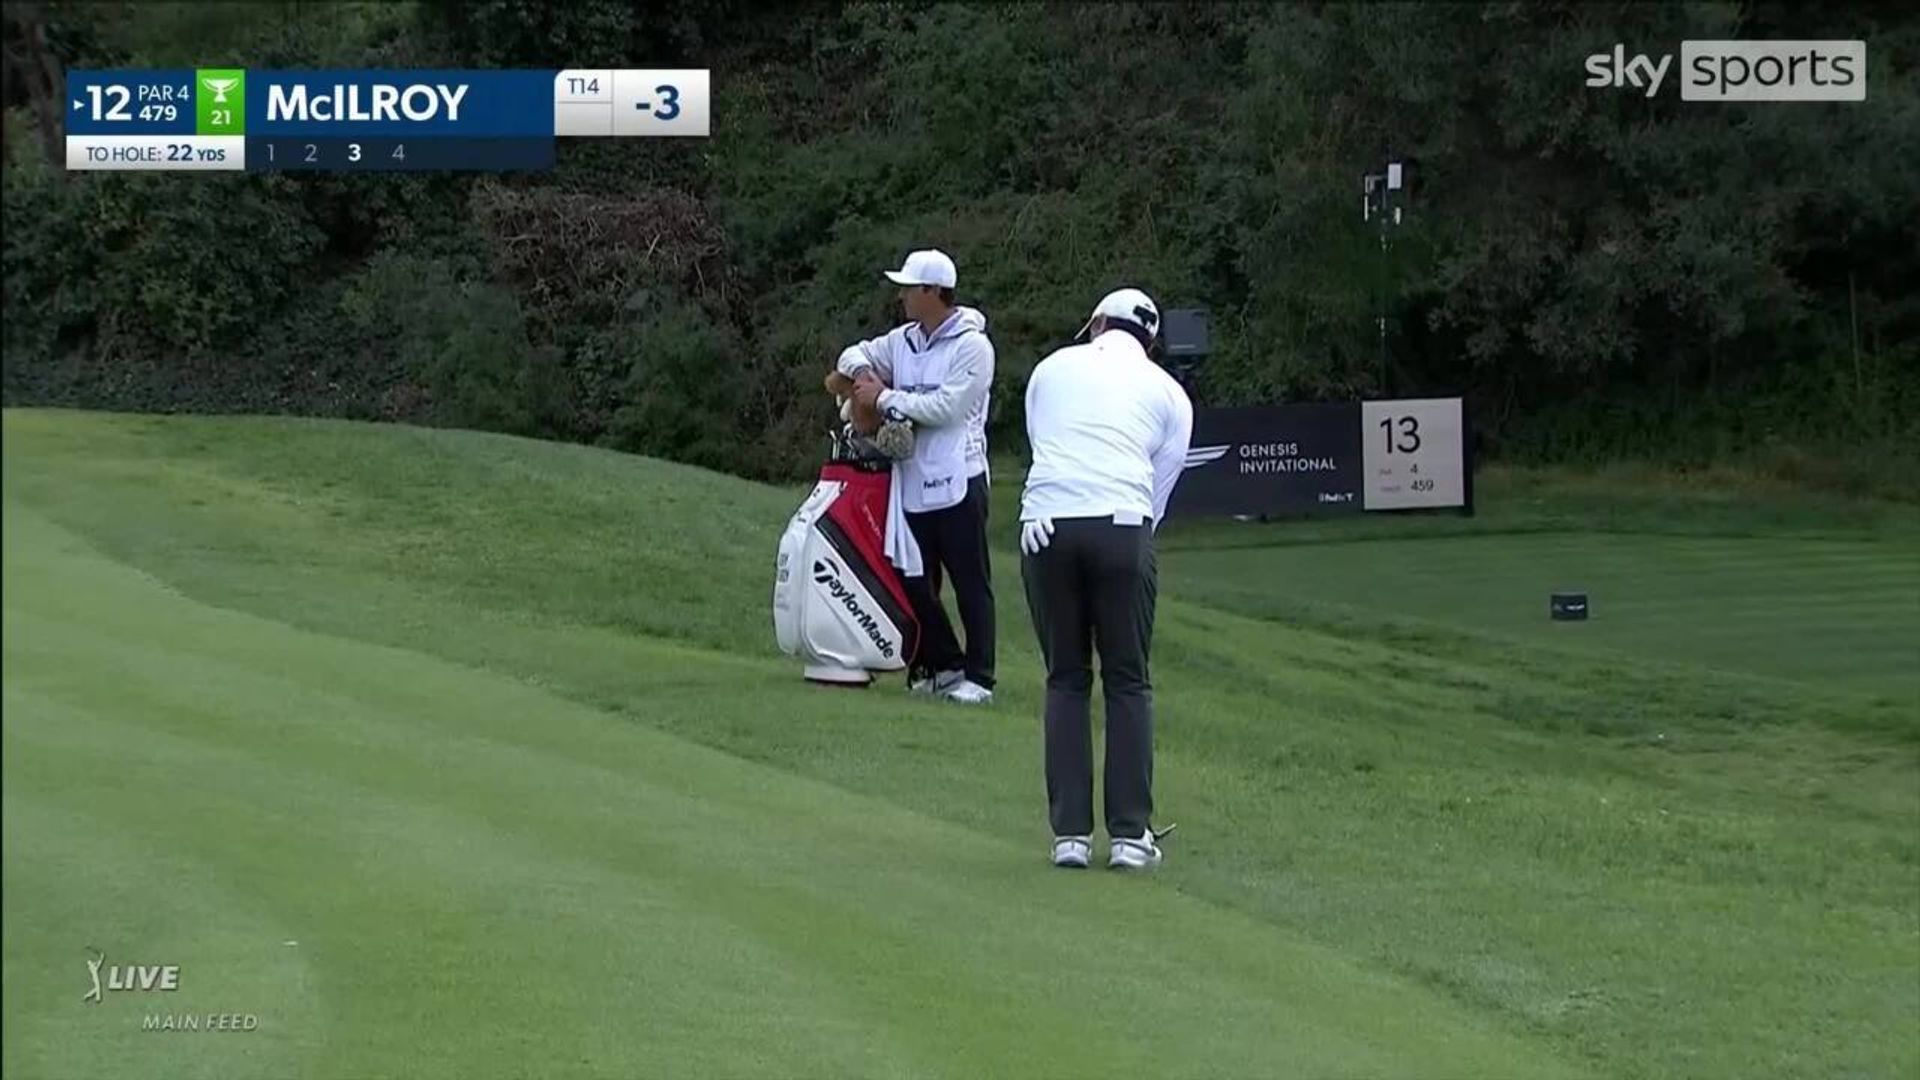 McIlroy's magical chip | Birdies 12th in fine style!